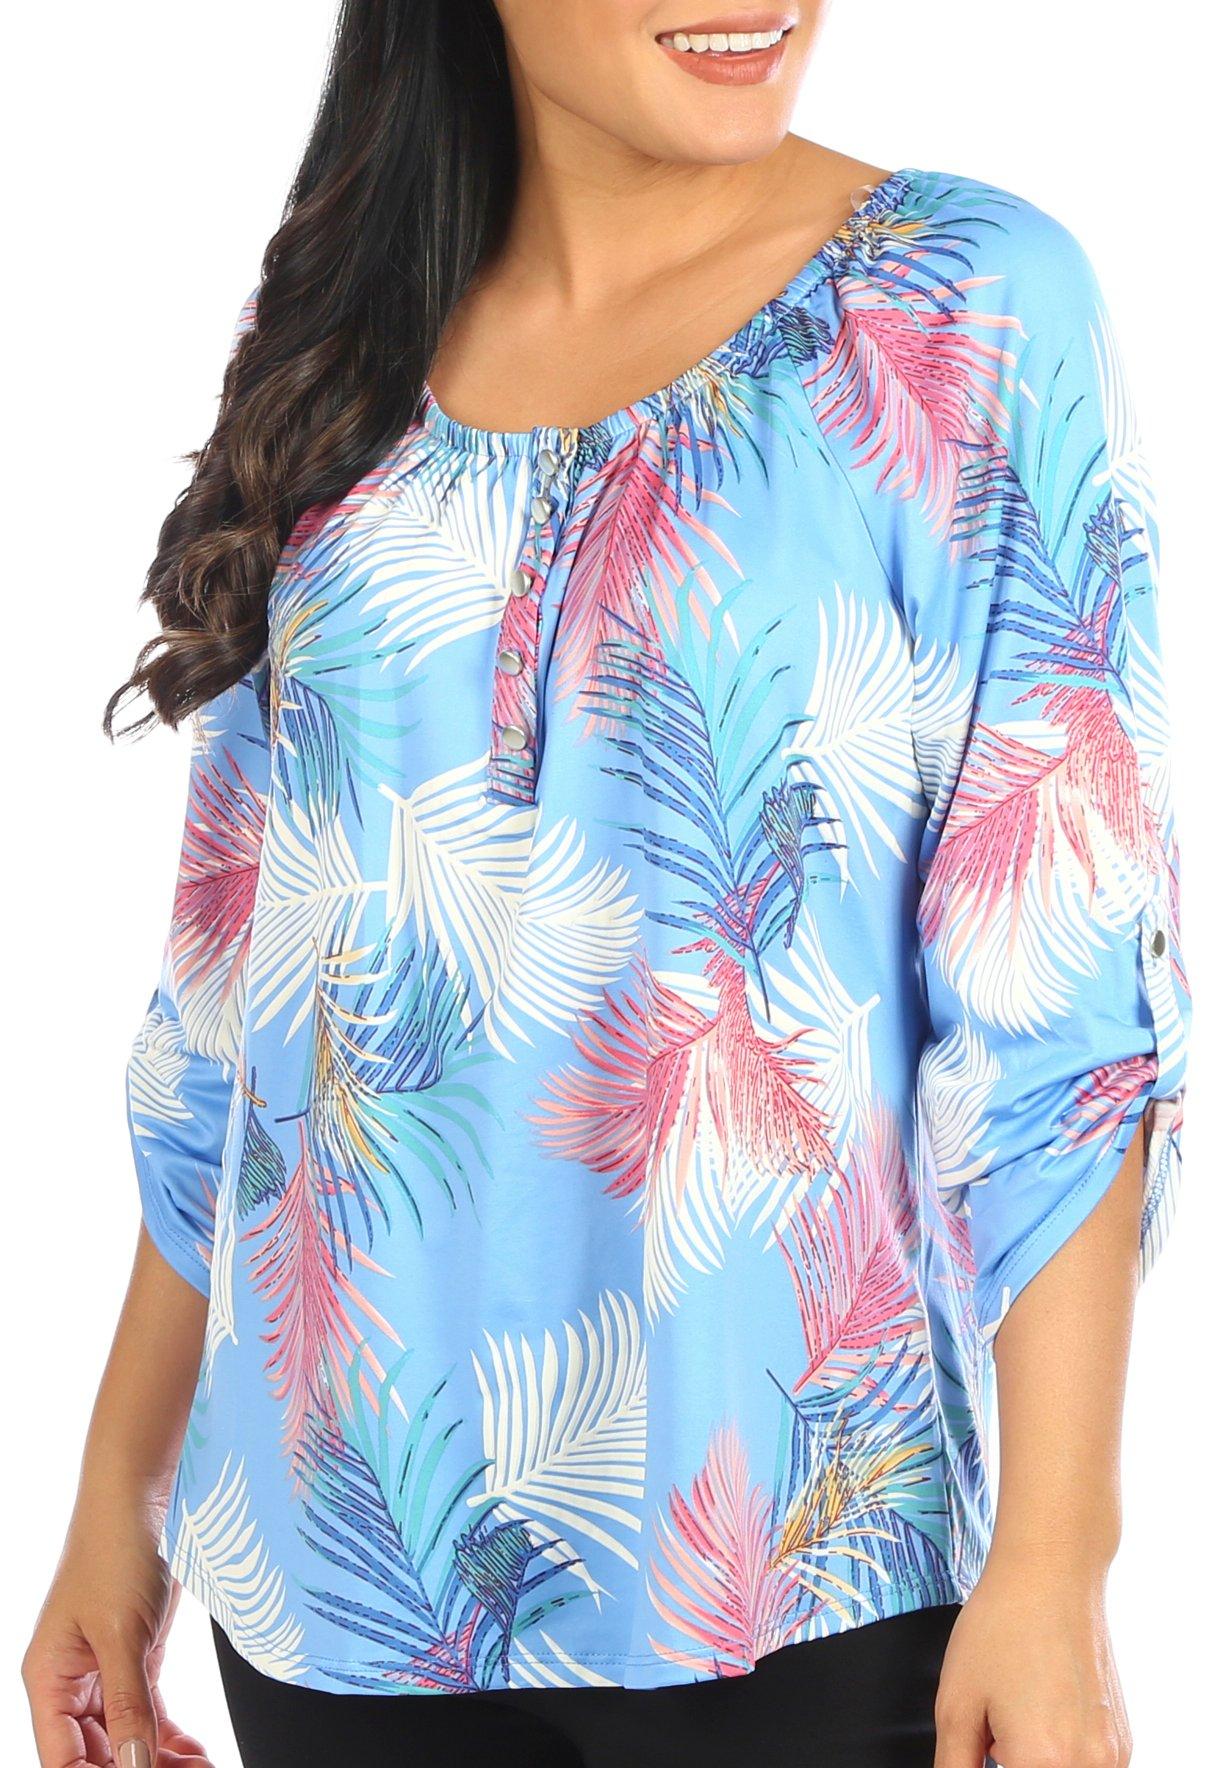 Juniper + Lime Womens Feather Print 3/4 Sleeve Top